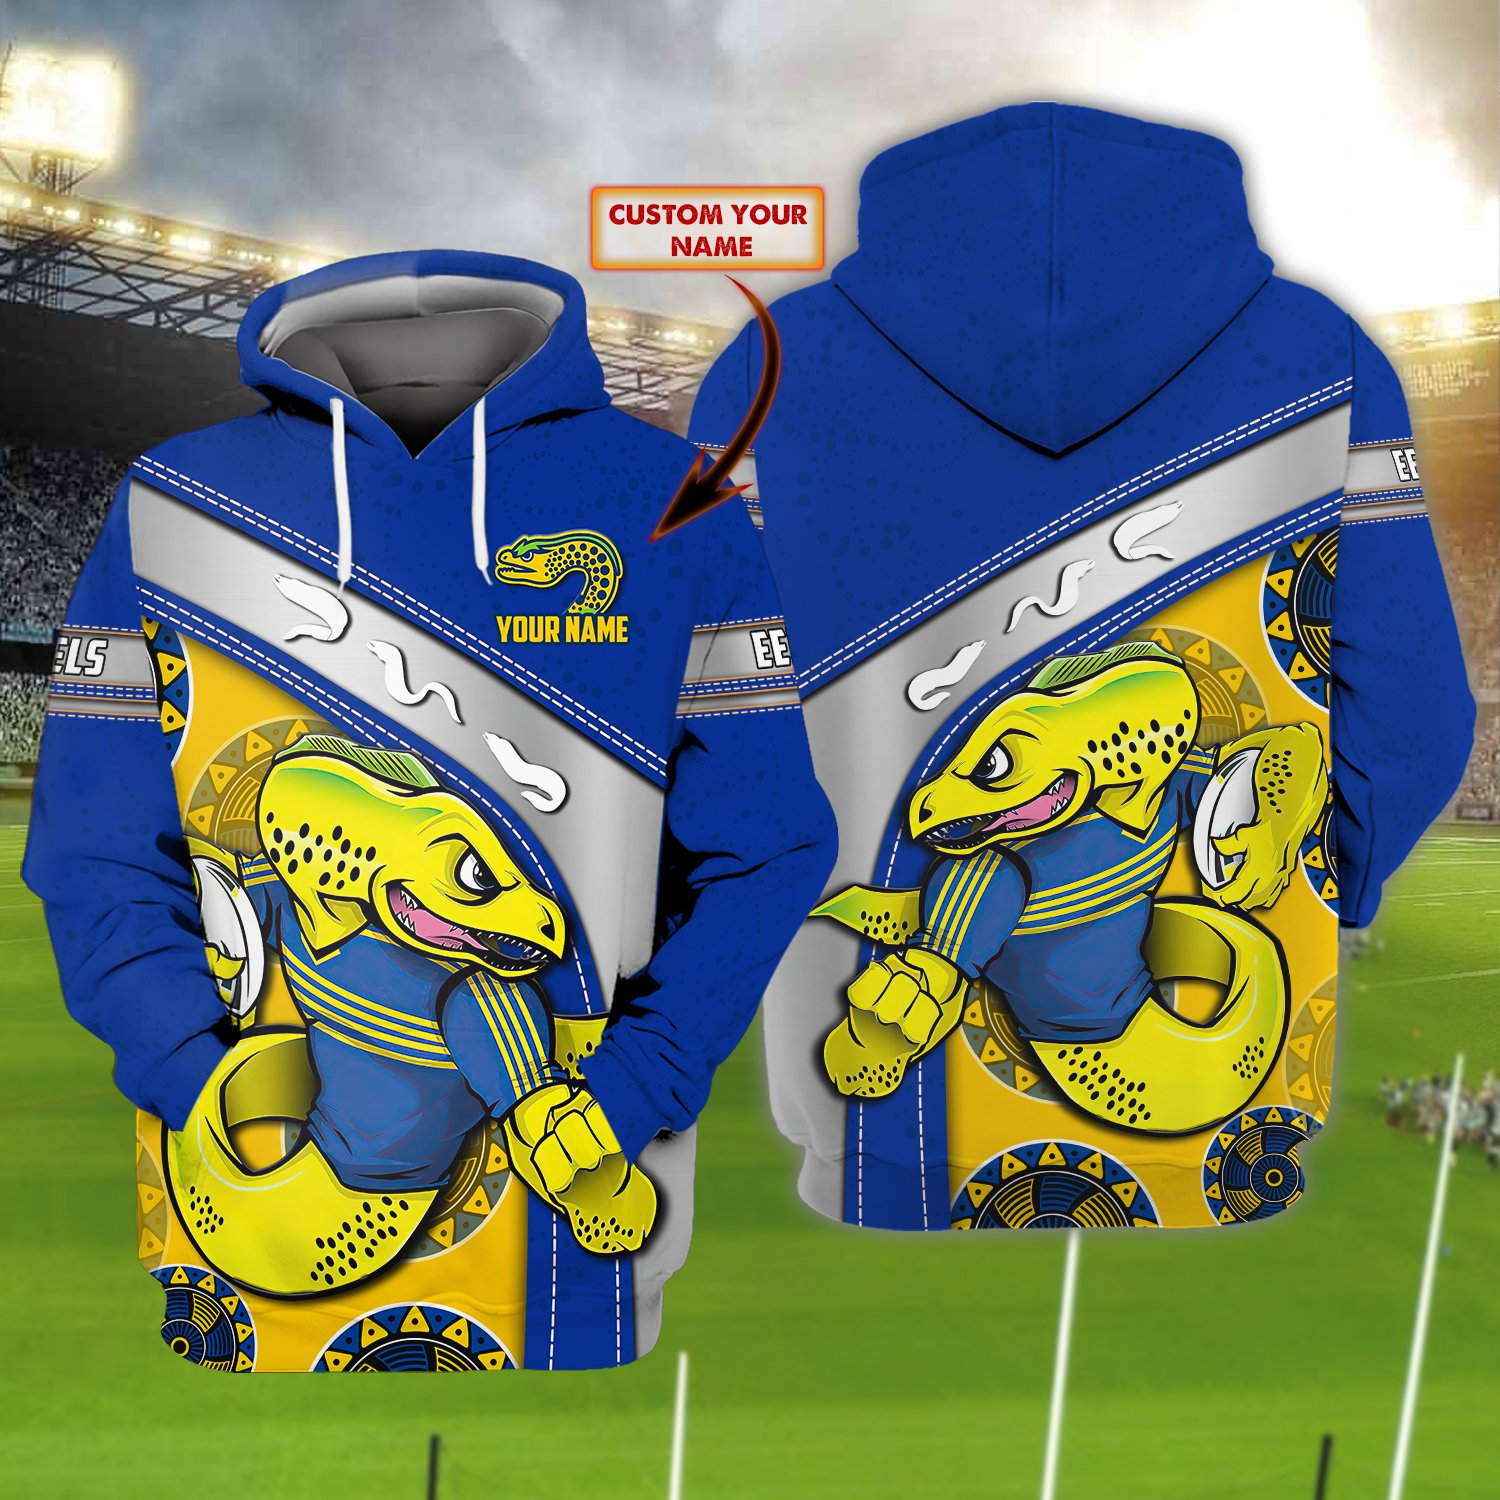 NRL Parramatta Eels custom personalized name shirt, hoodie – LIMITED EDITION